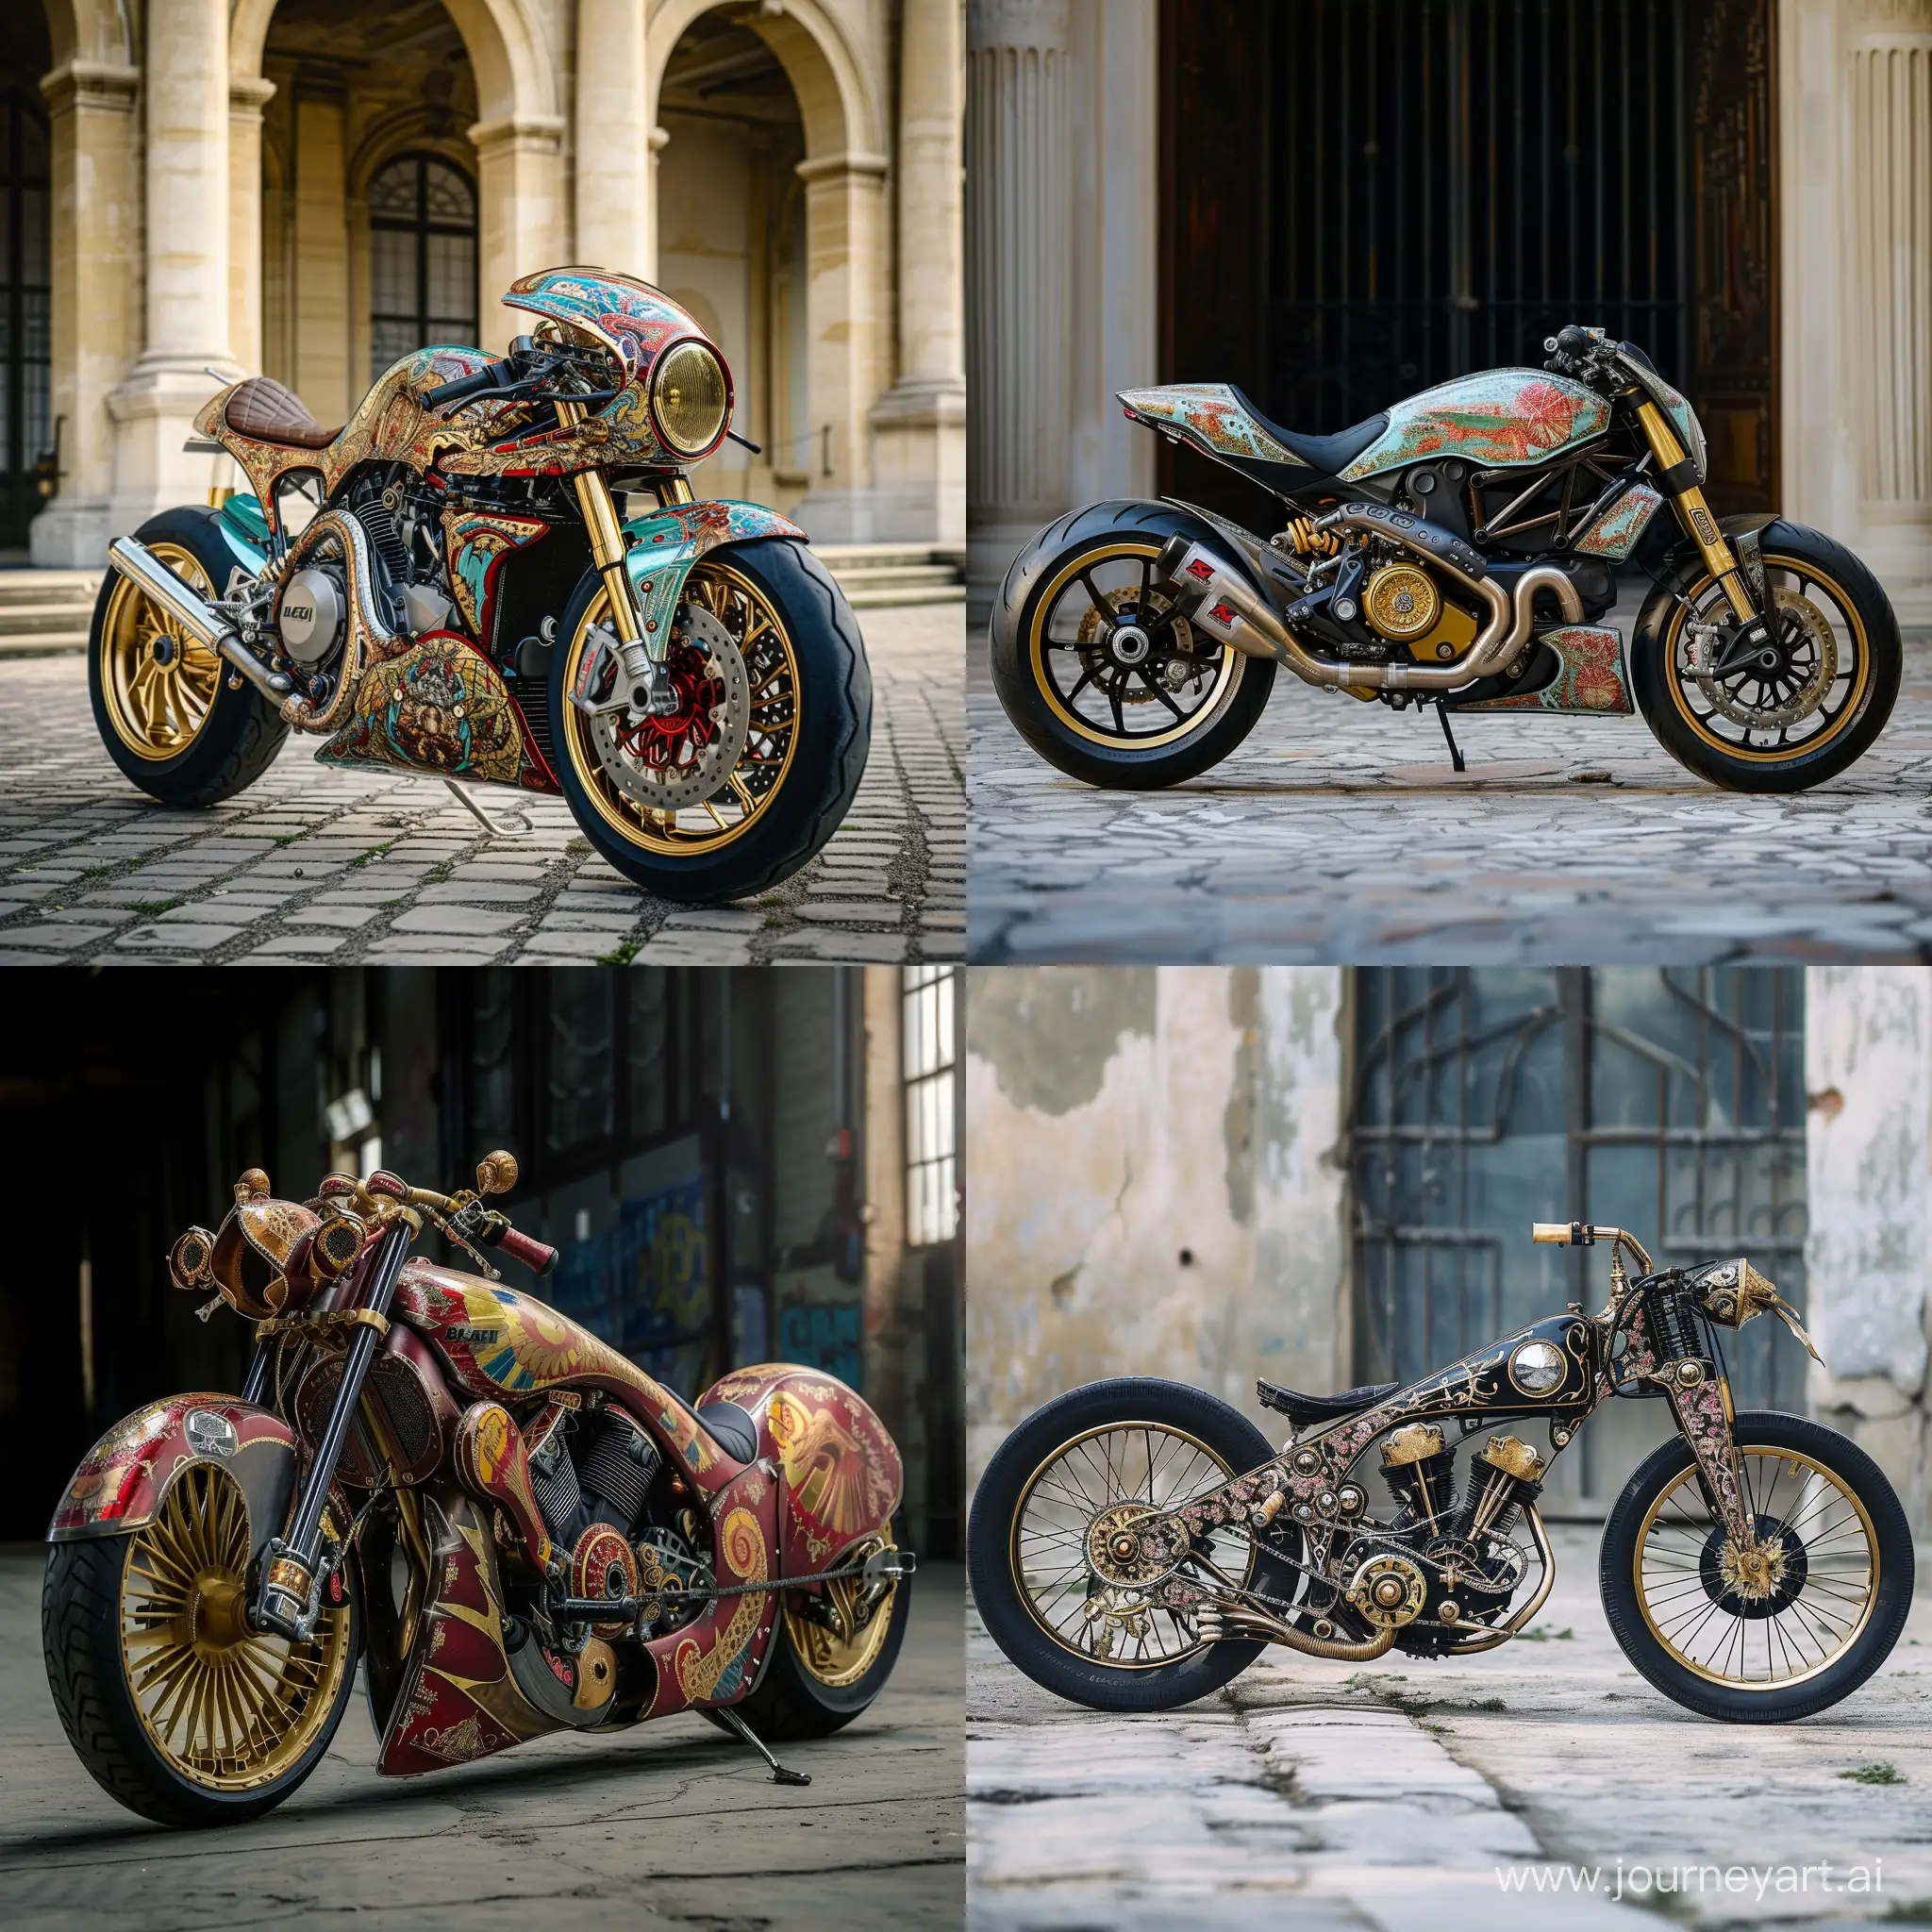 Make a special custom ducati motorcycle inspired by Mad Max and vintage circus elements in art nouveau style

